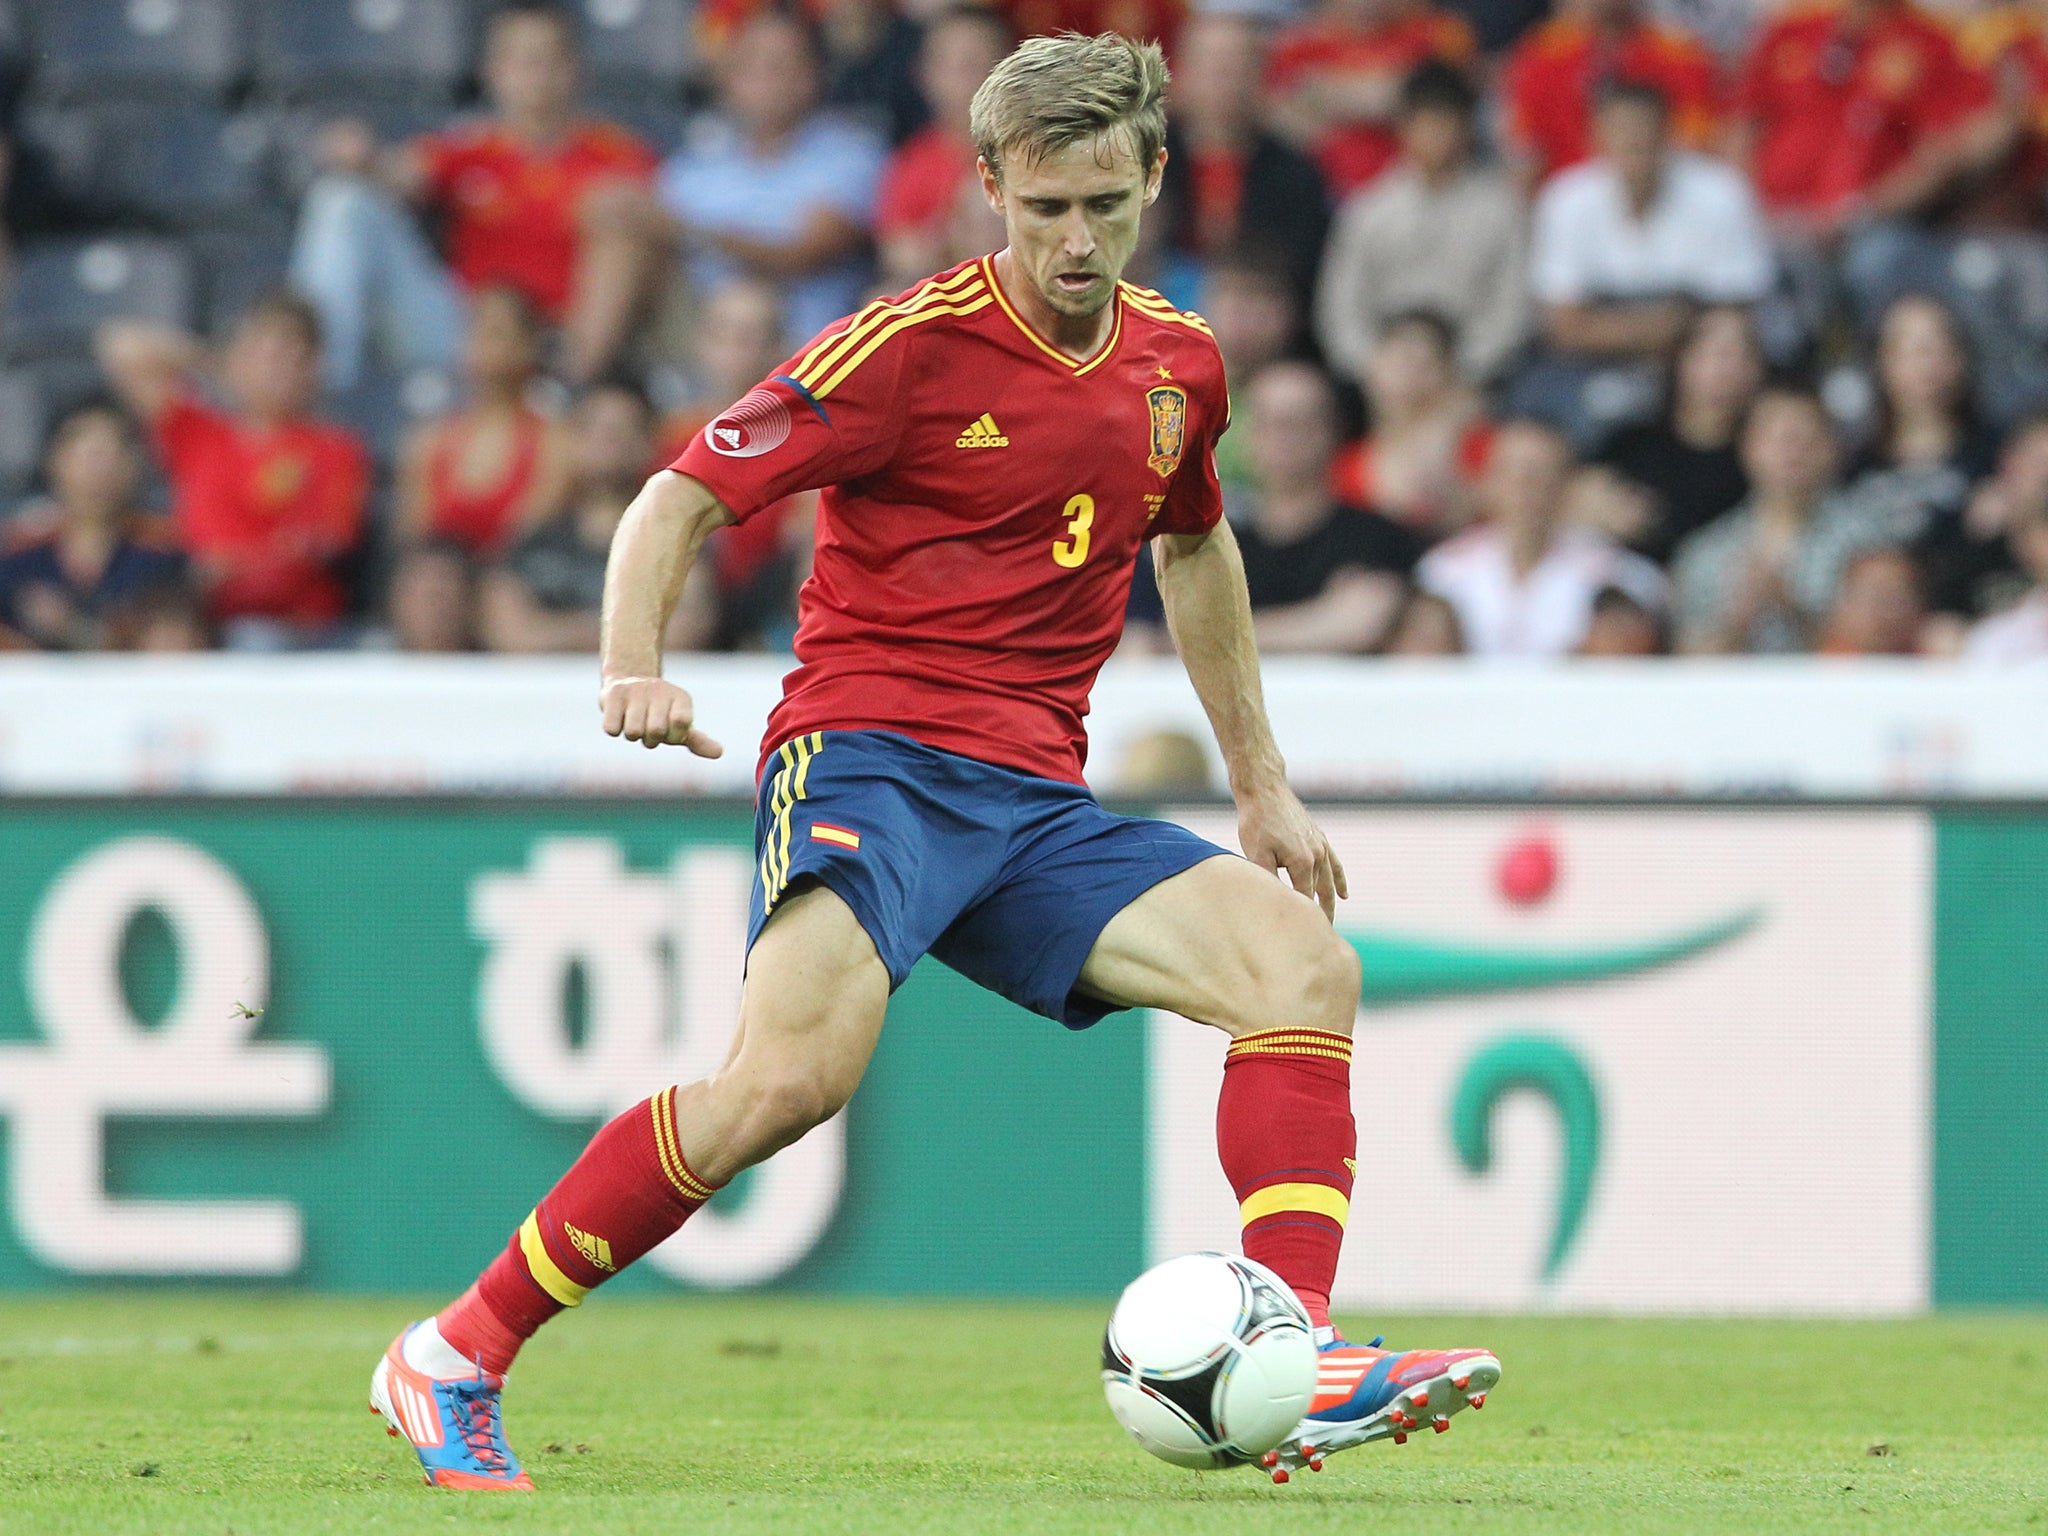 Monreal in action for Spain